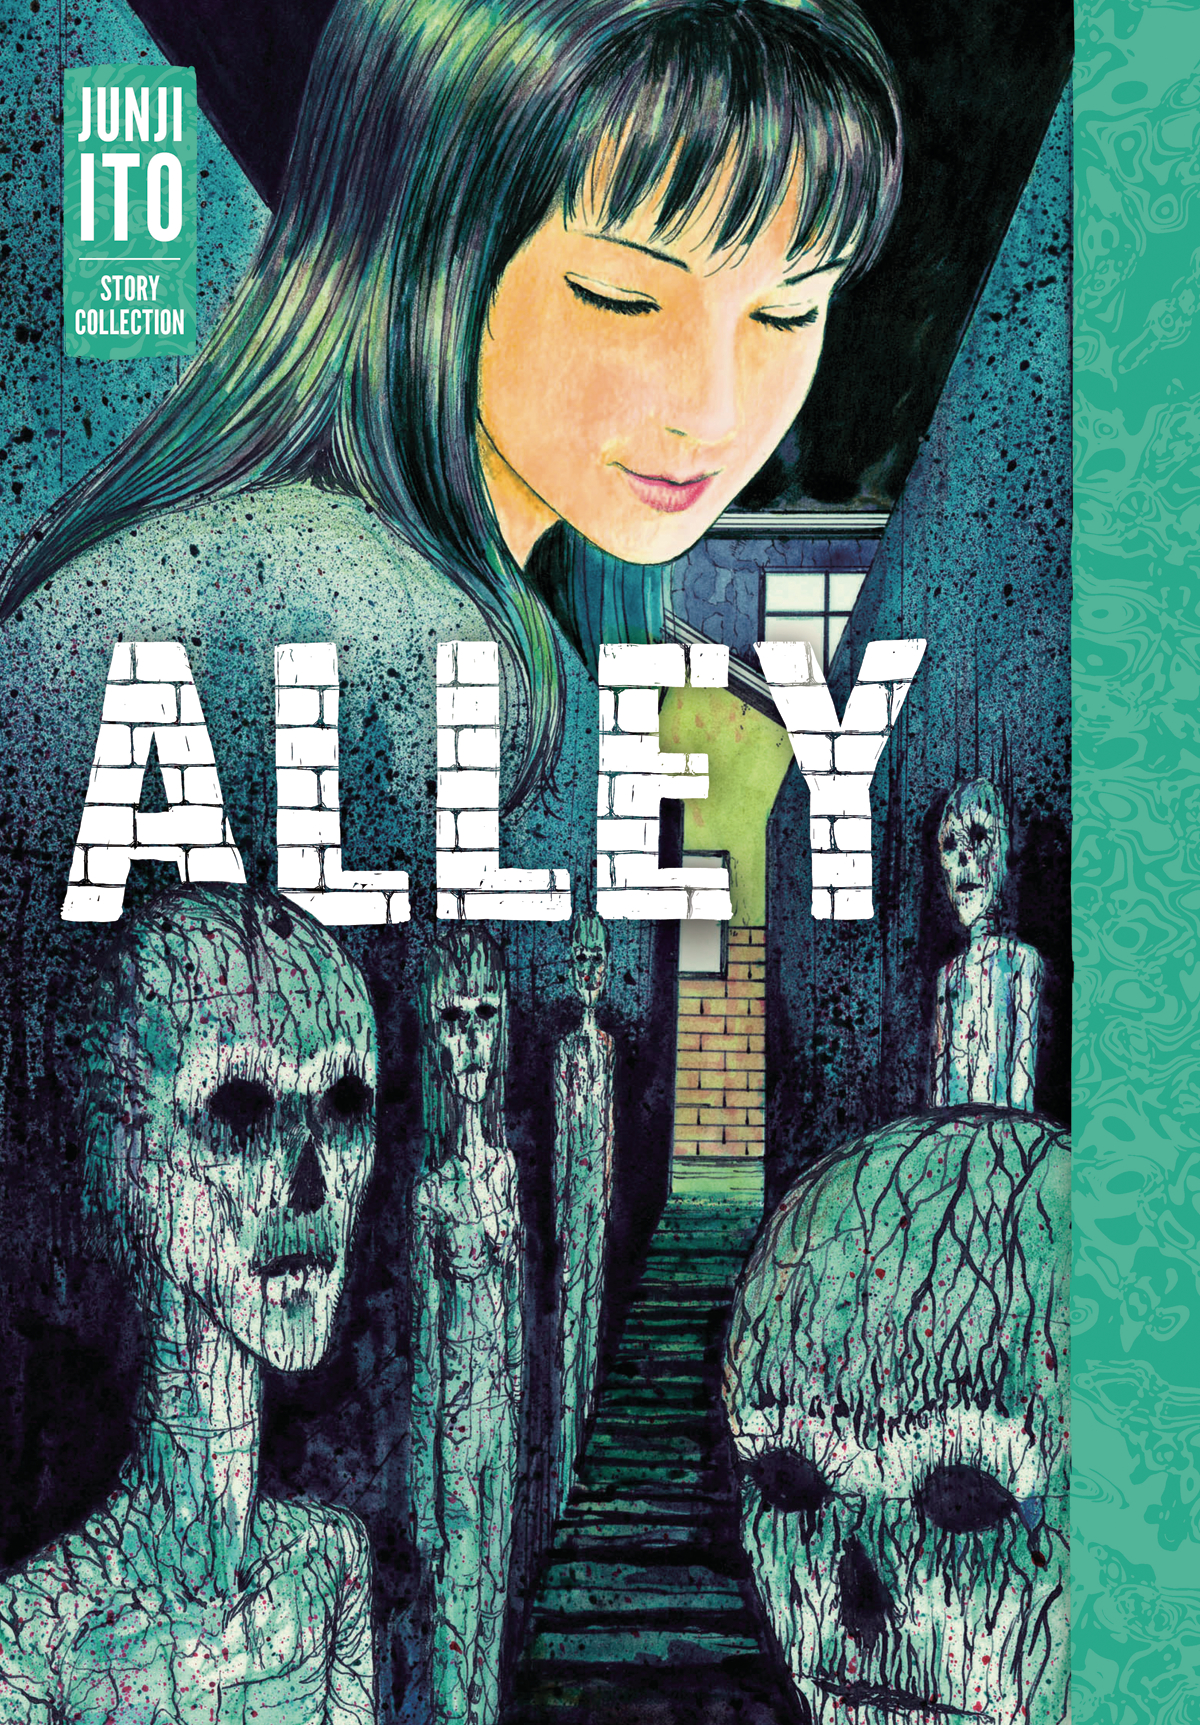 Junji Ito Story Collection Hardcover Volume 13 Alley